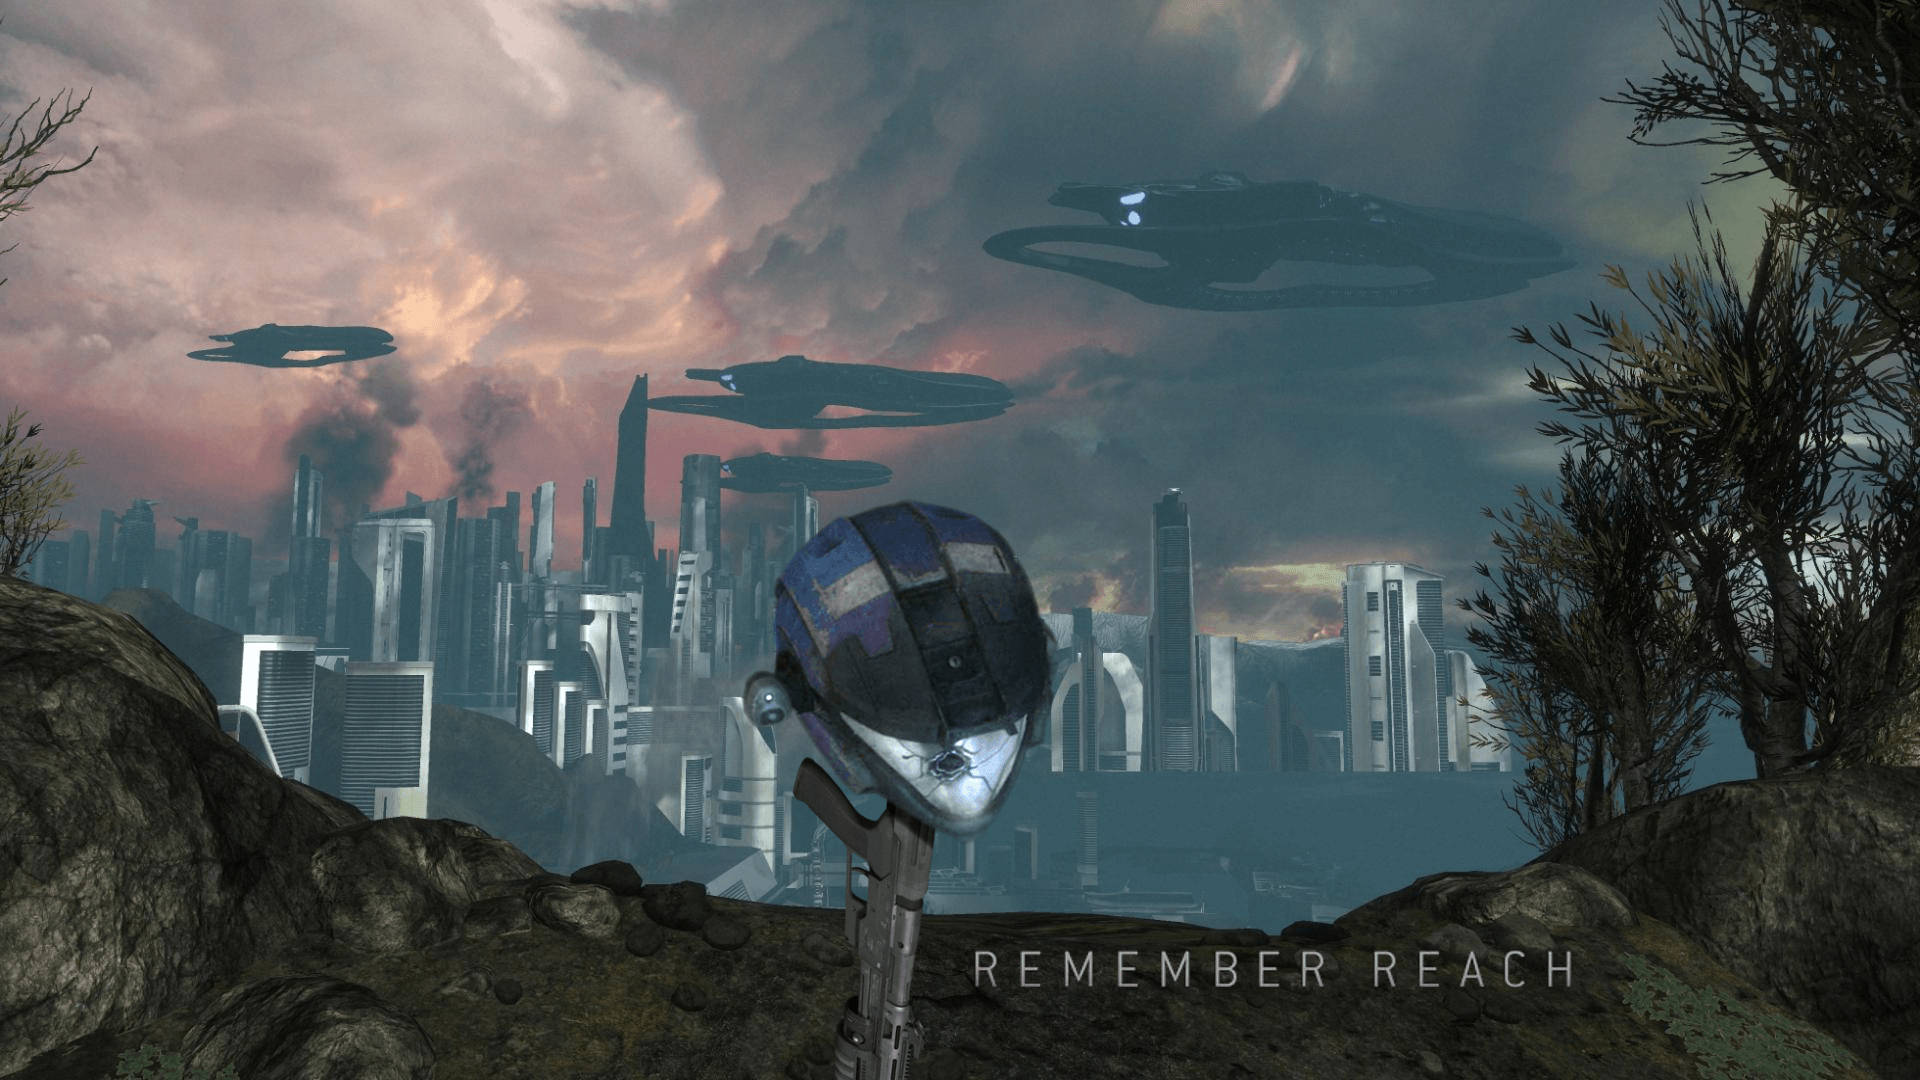 Humans muster their strength against the powerful Covenant forces in 'Halo Reach'. Wallpaper